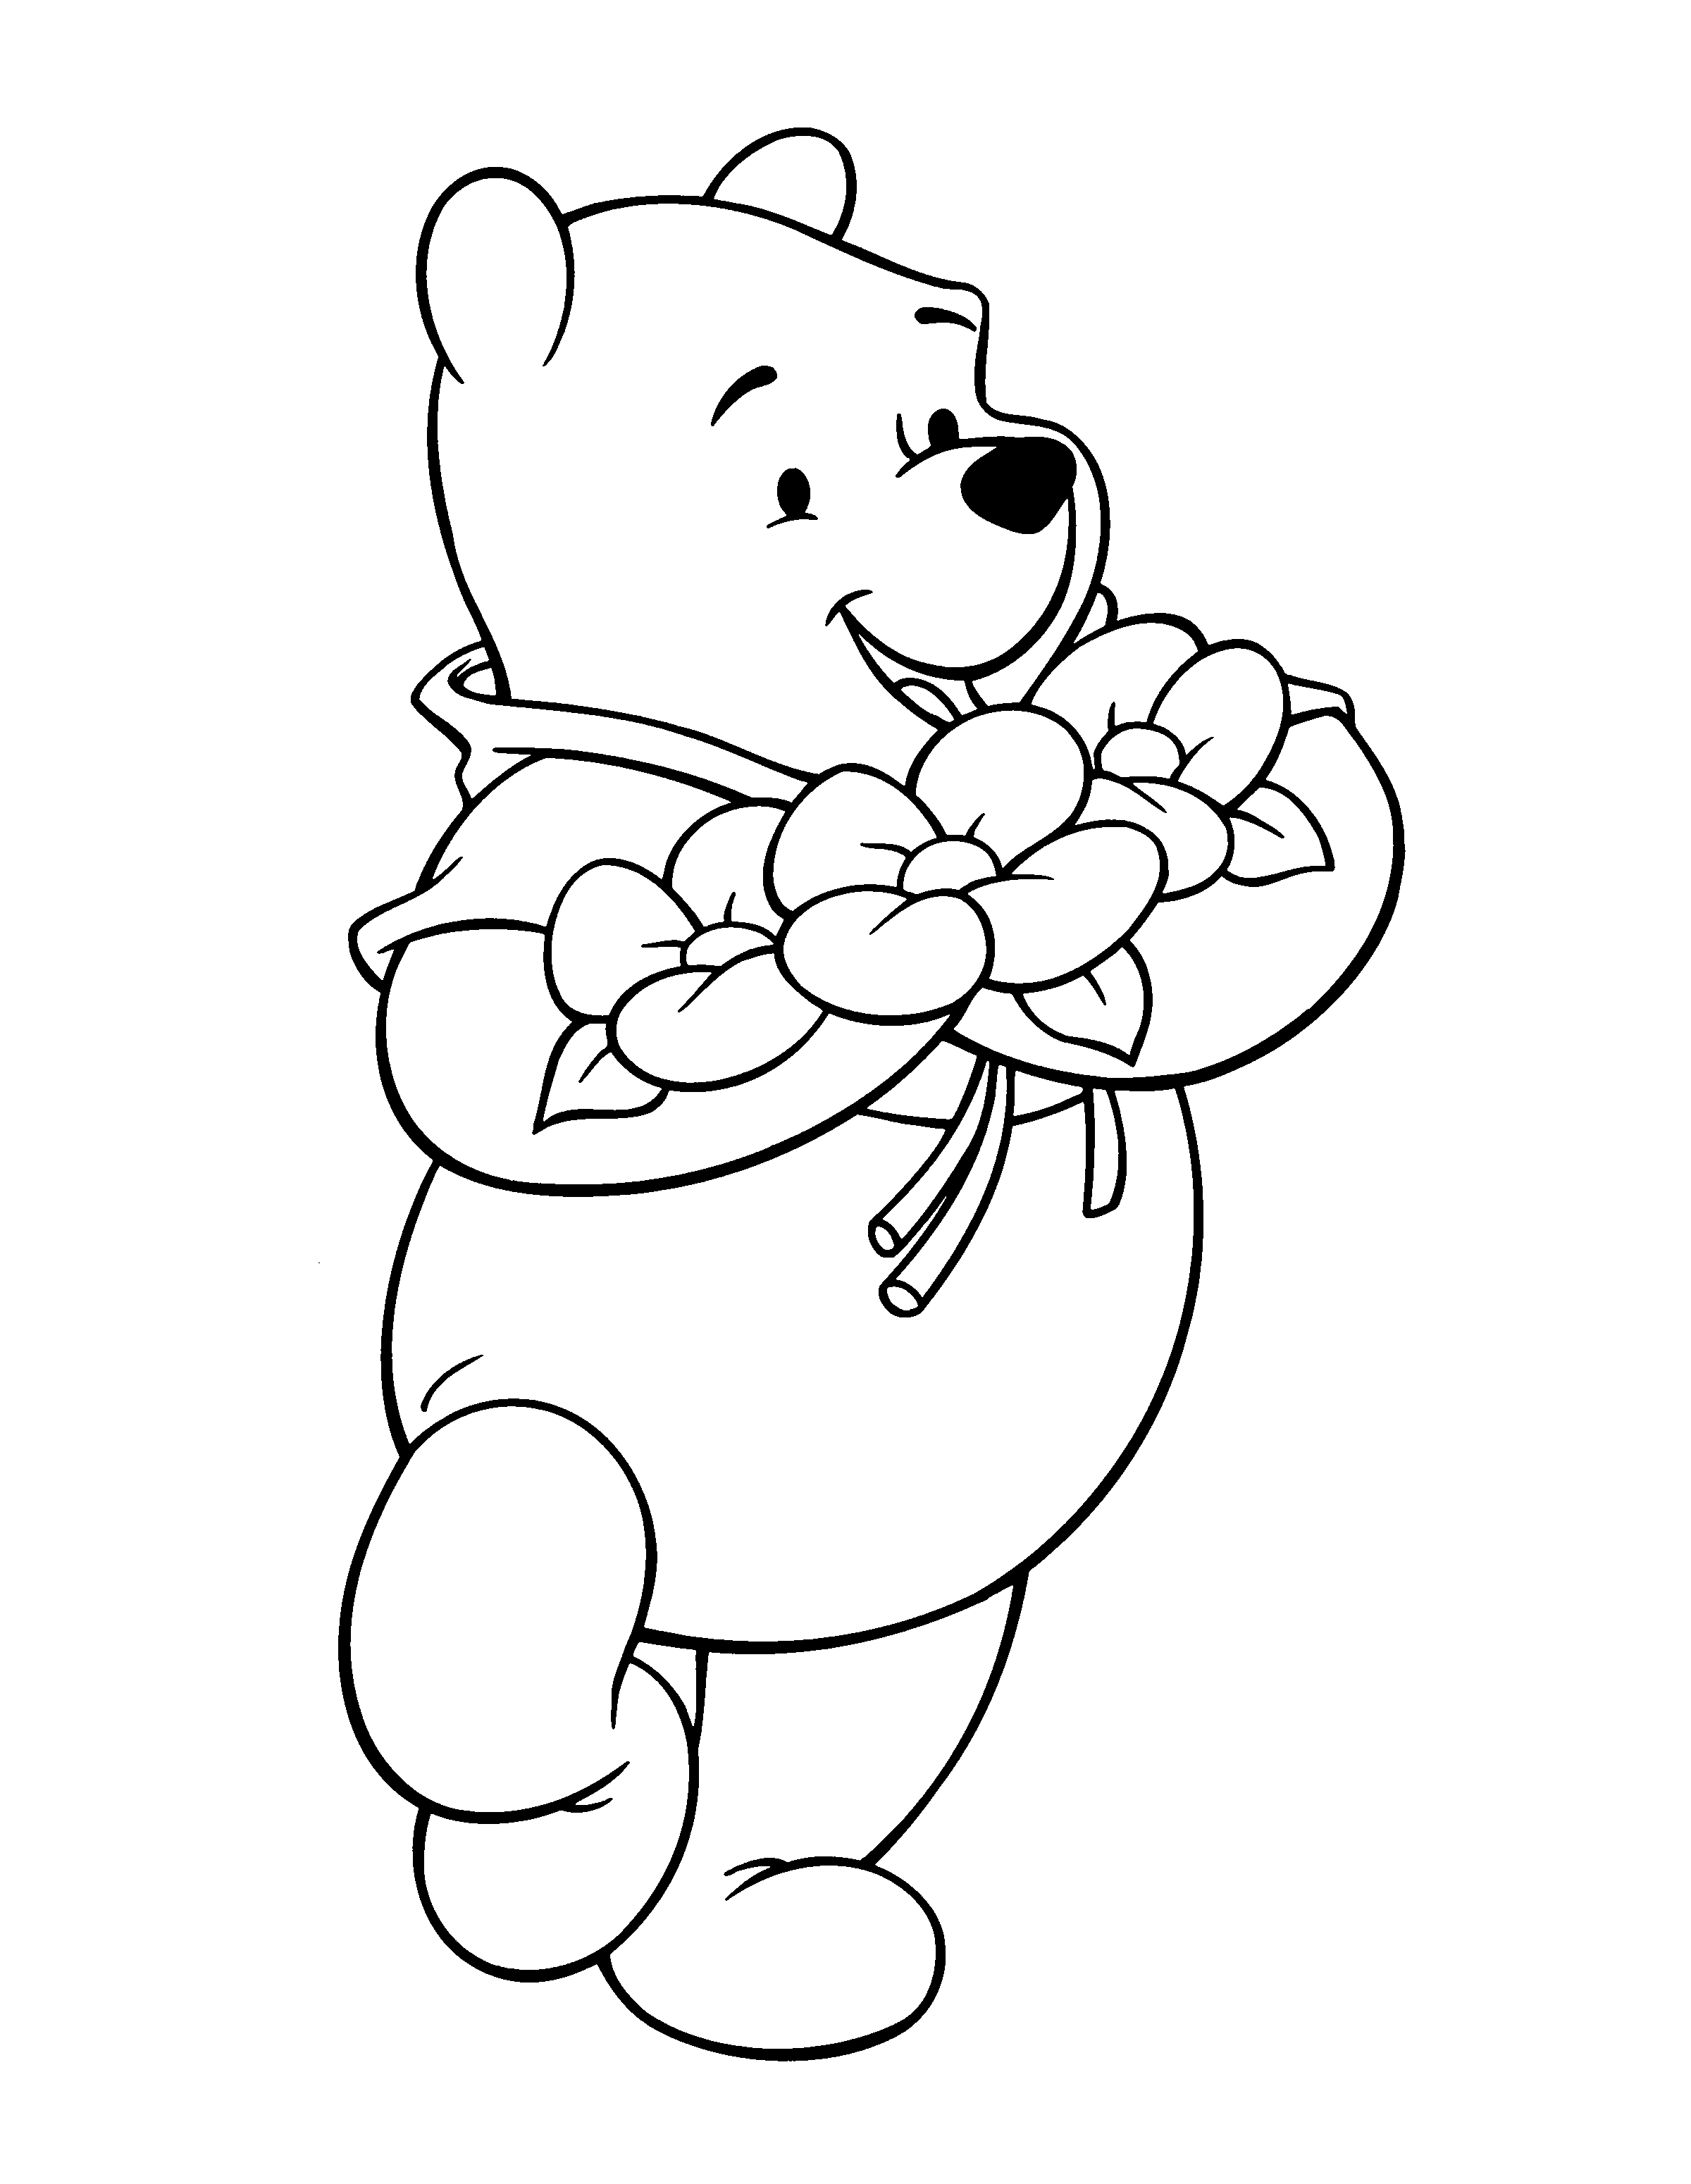 Winnie the Pooh (Animation Movies) Printable coloring pages